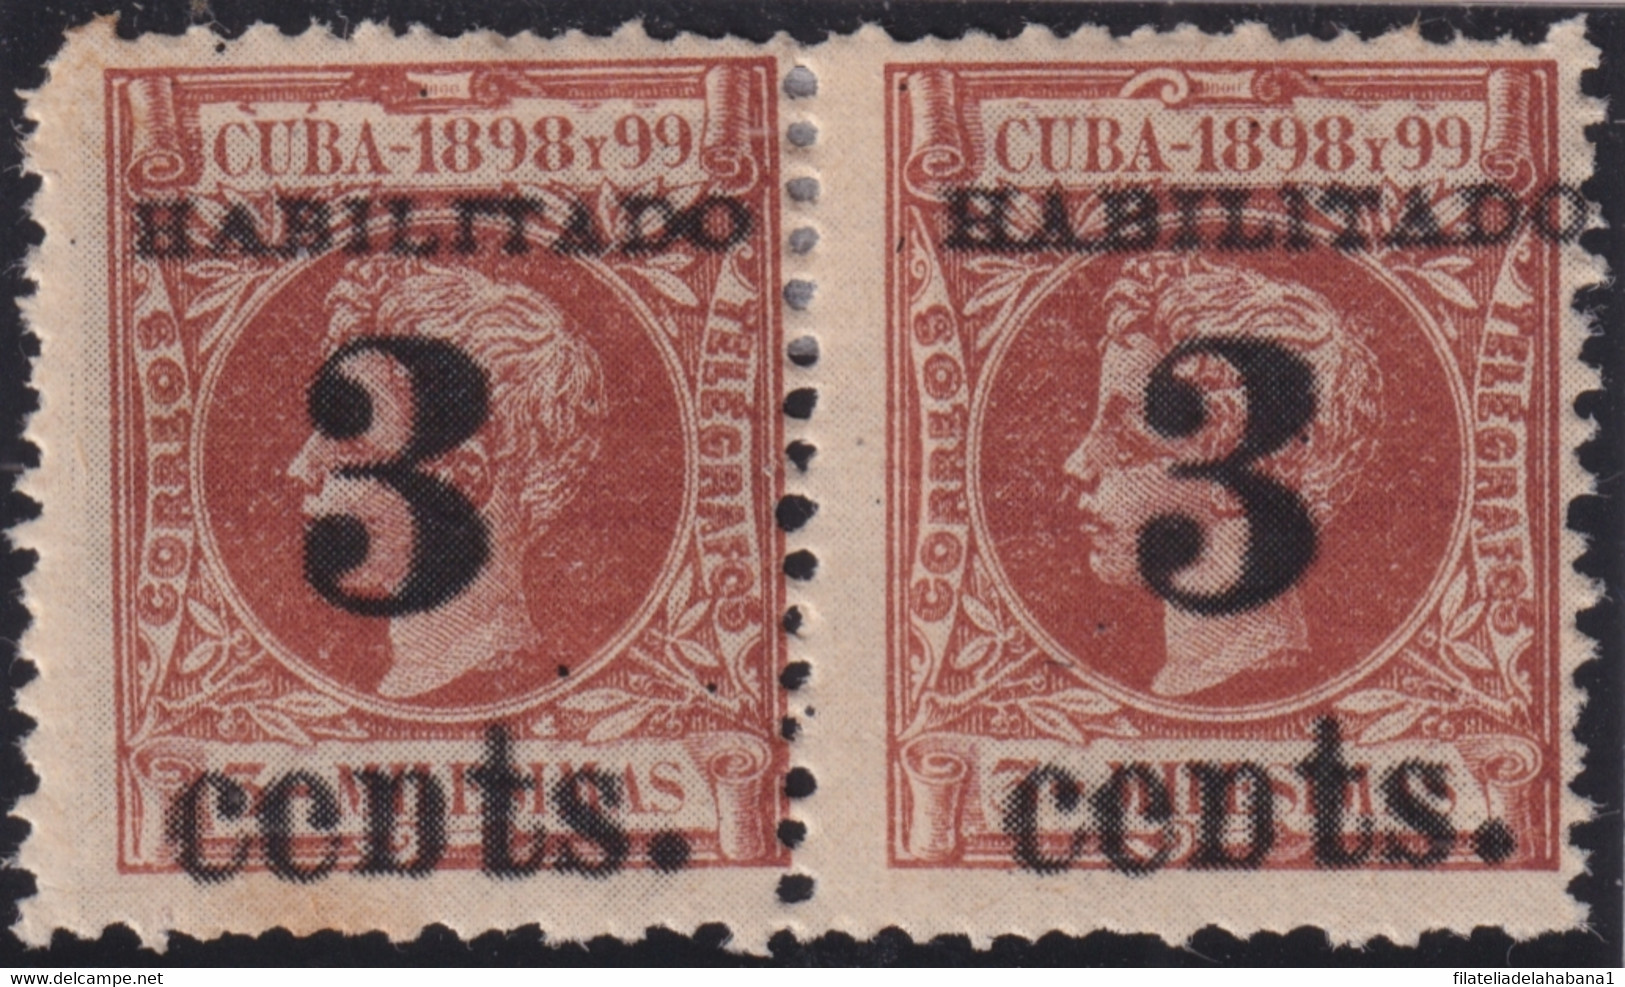 1899-464 CUBA 1899 3c S. 3c PAIR US OCCUPATION FIRST ISSUE PHILATELIC FORGERY. - Unused Stamps